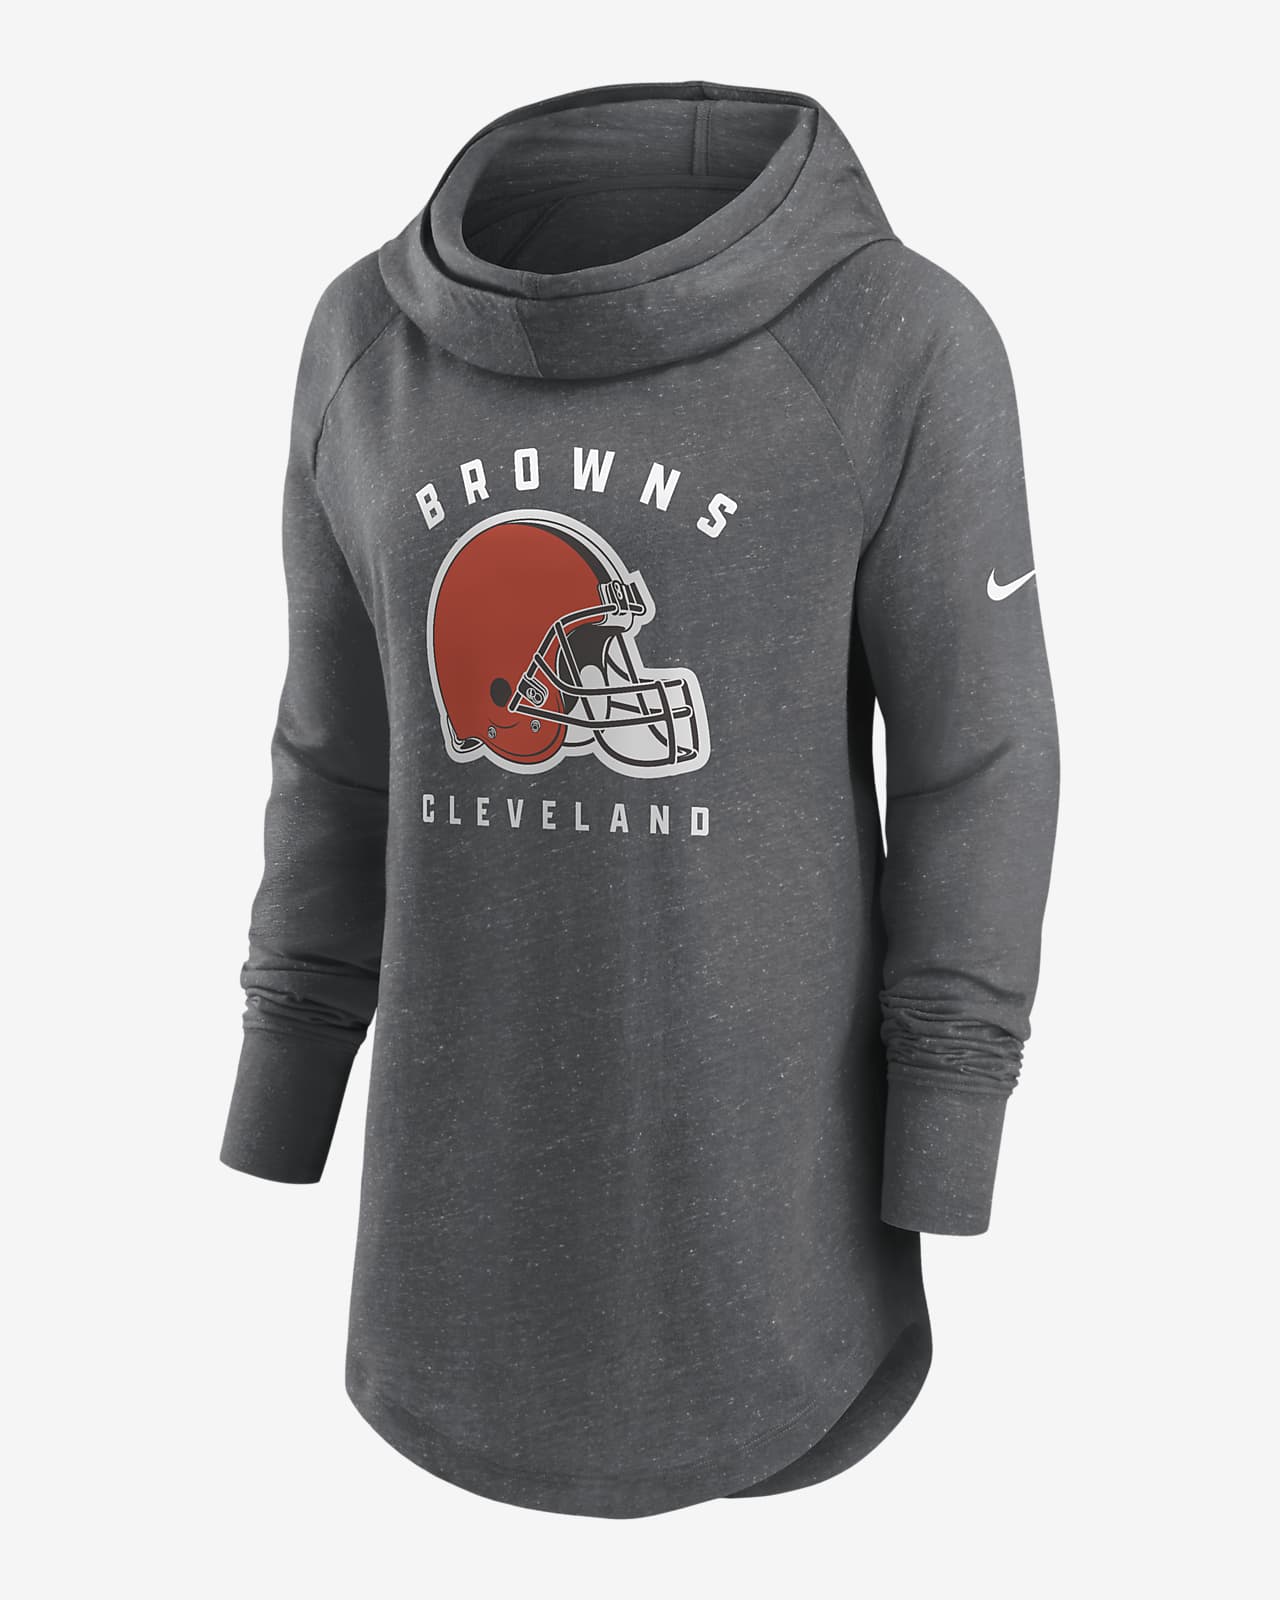 Nike Team (NFL Cleveland Browns) Women's Pullover Hoodie